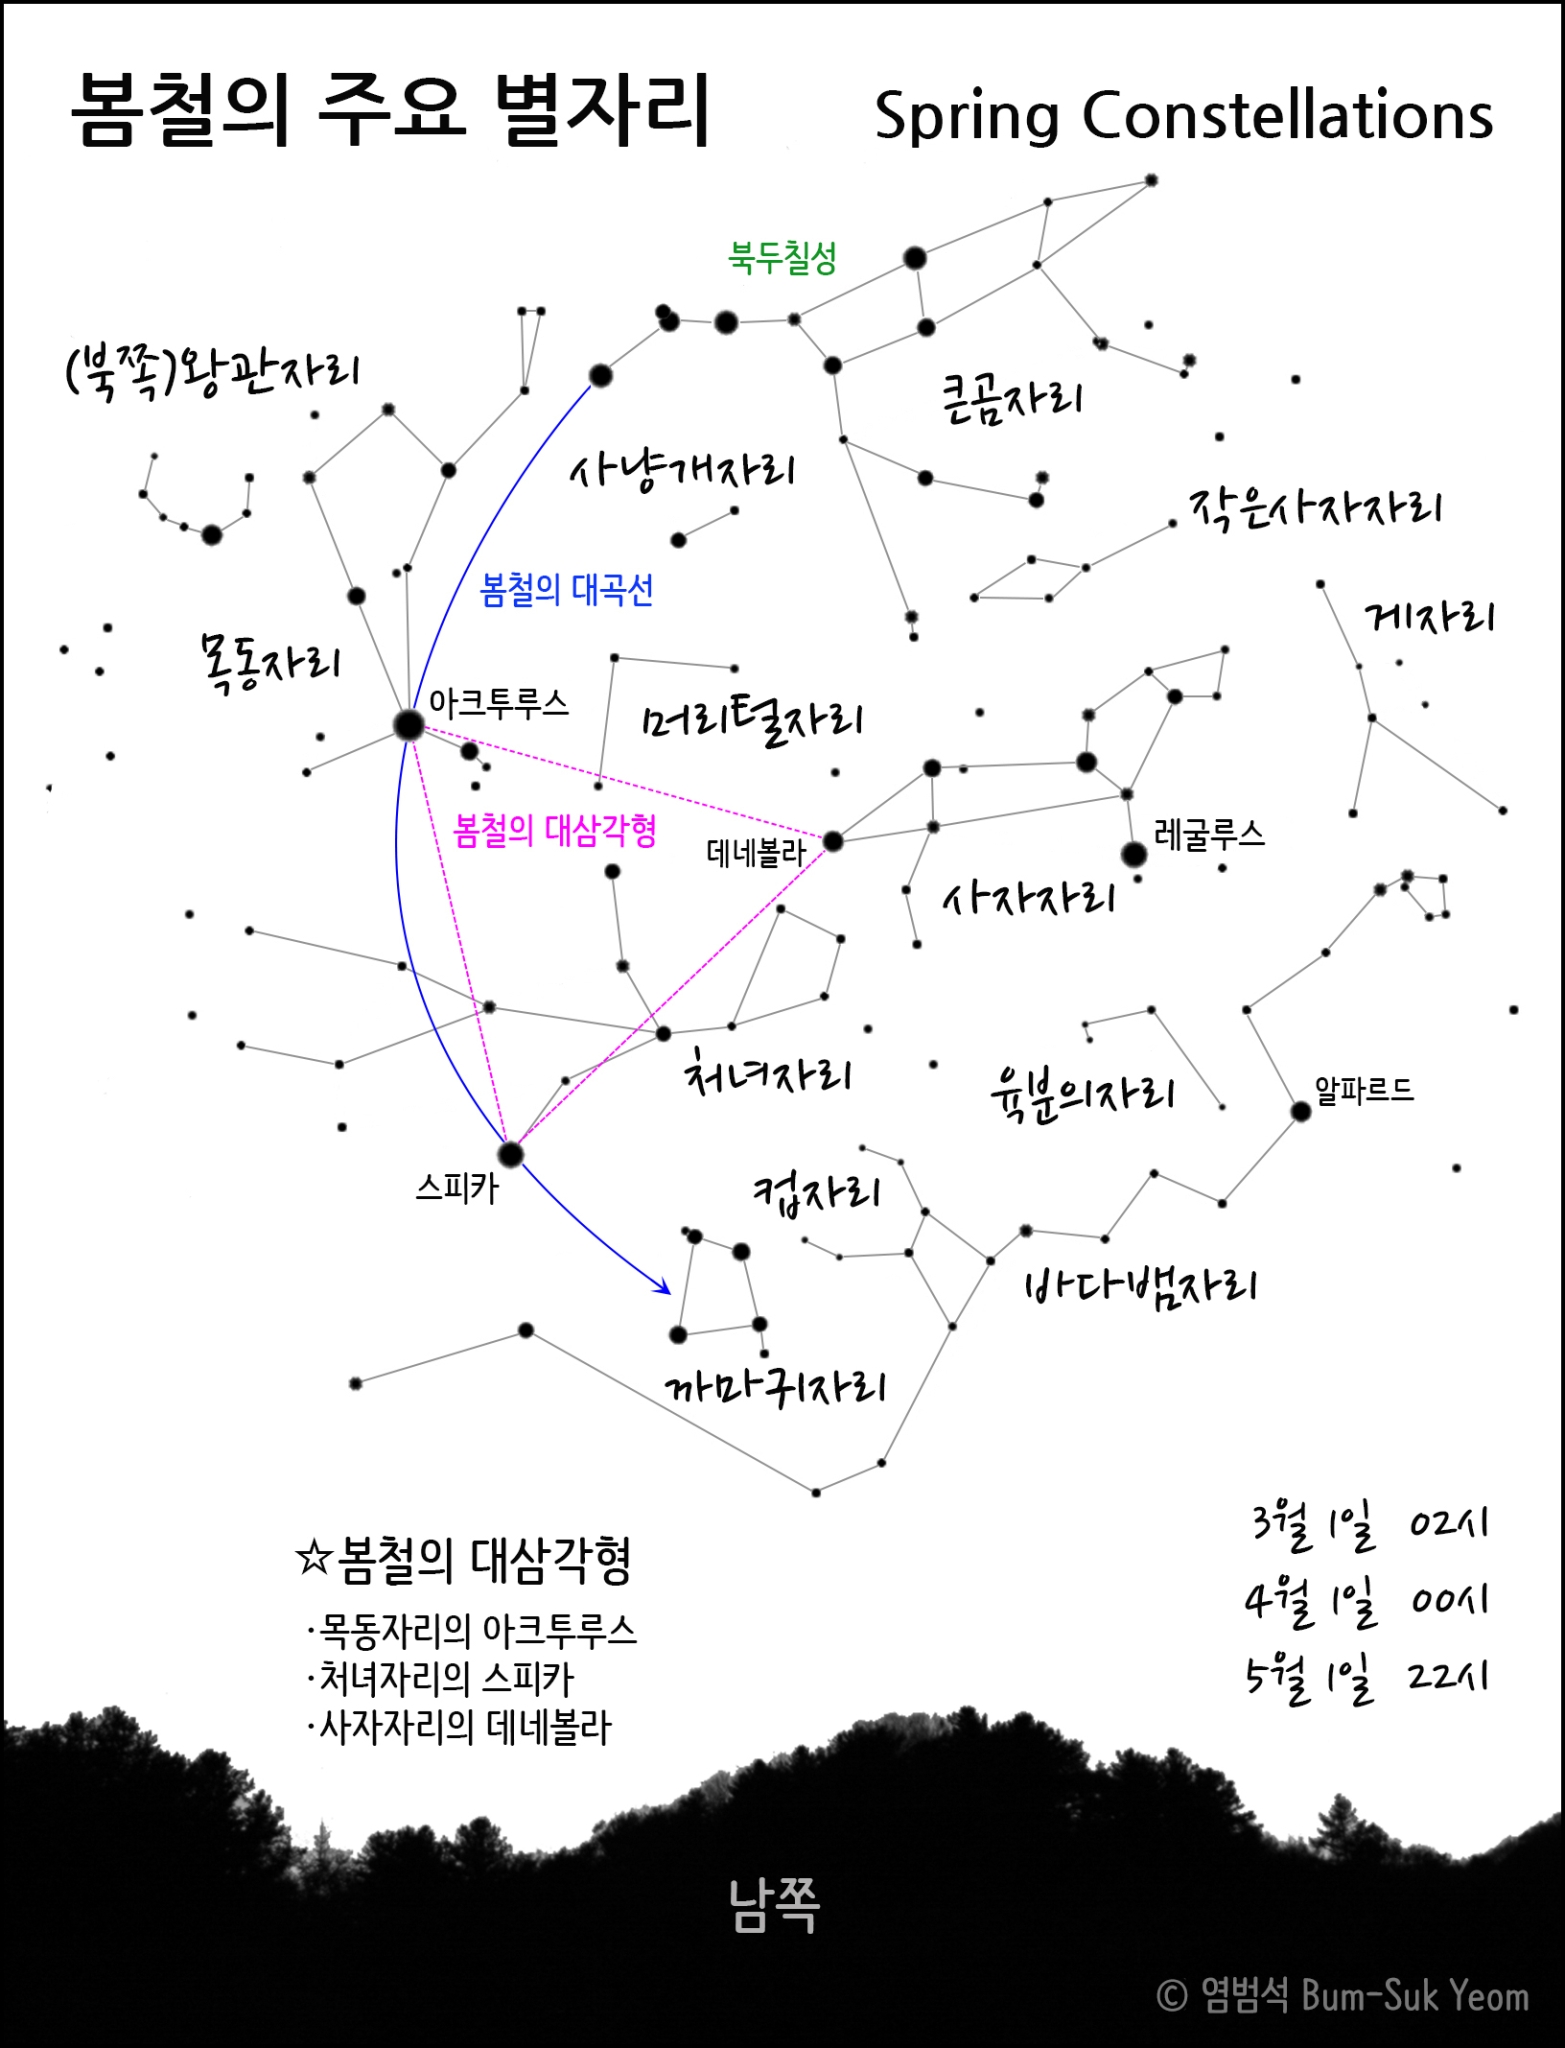 constellation_chart_01_spring_bsyeom